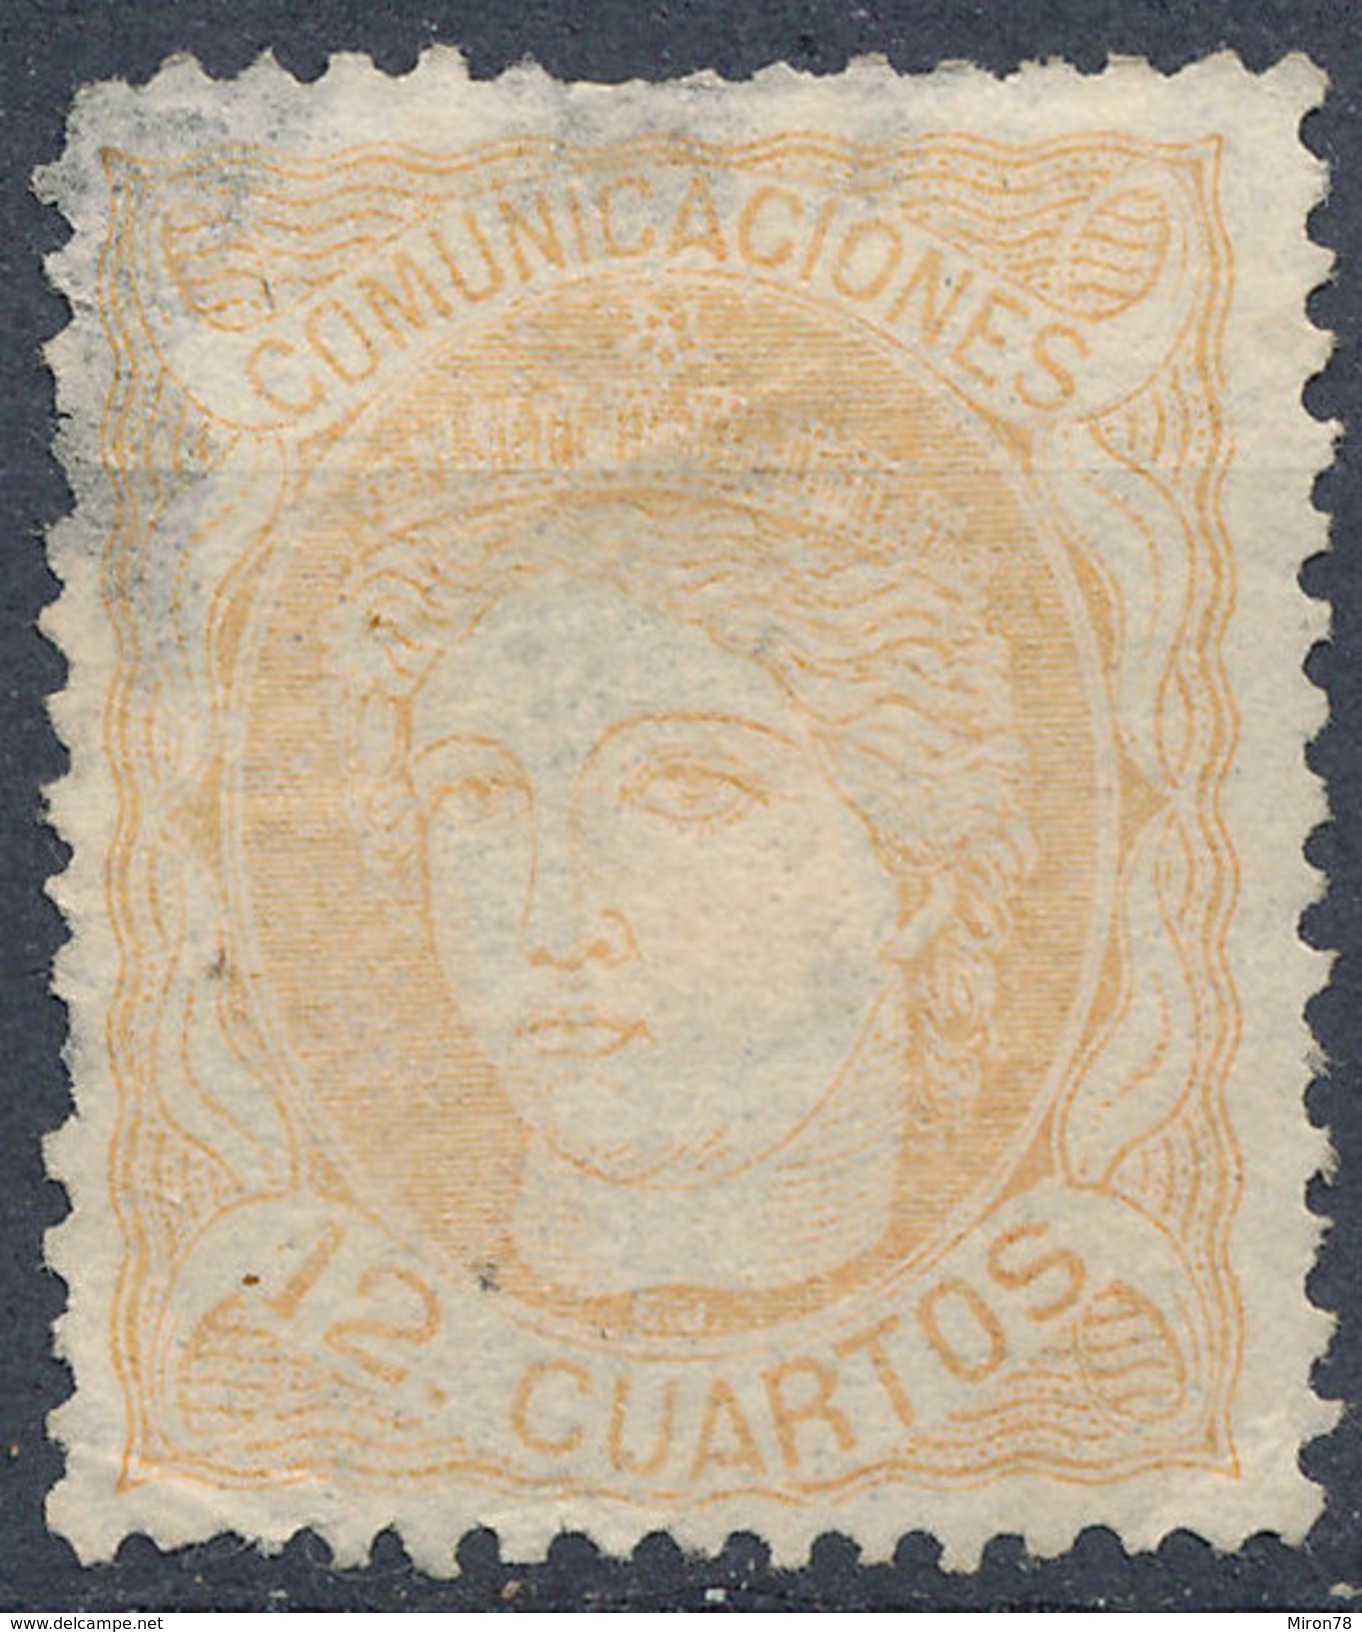 Stamp Spain 1870  Used - Used Stamps